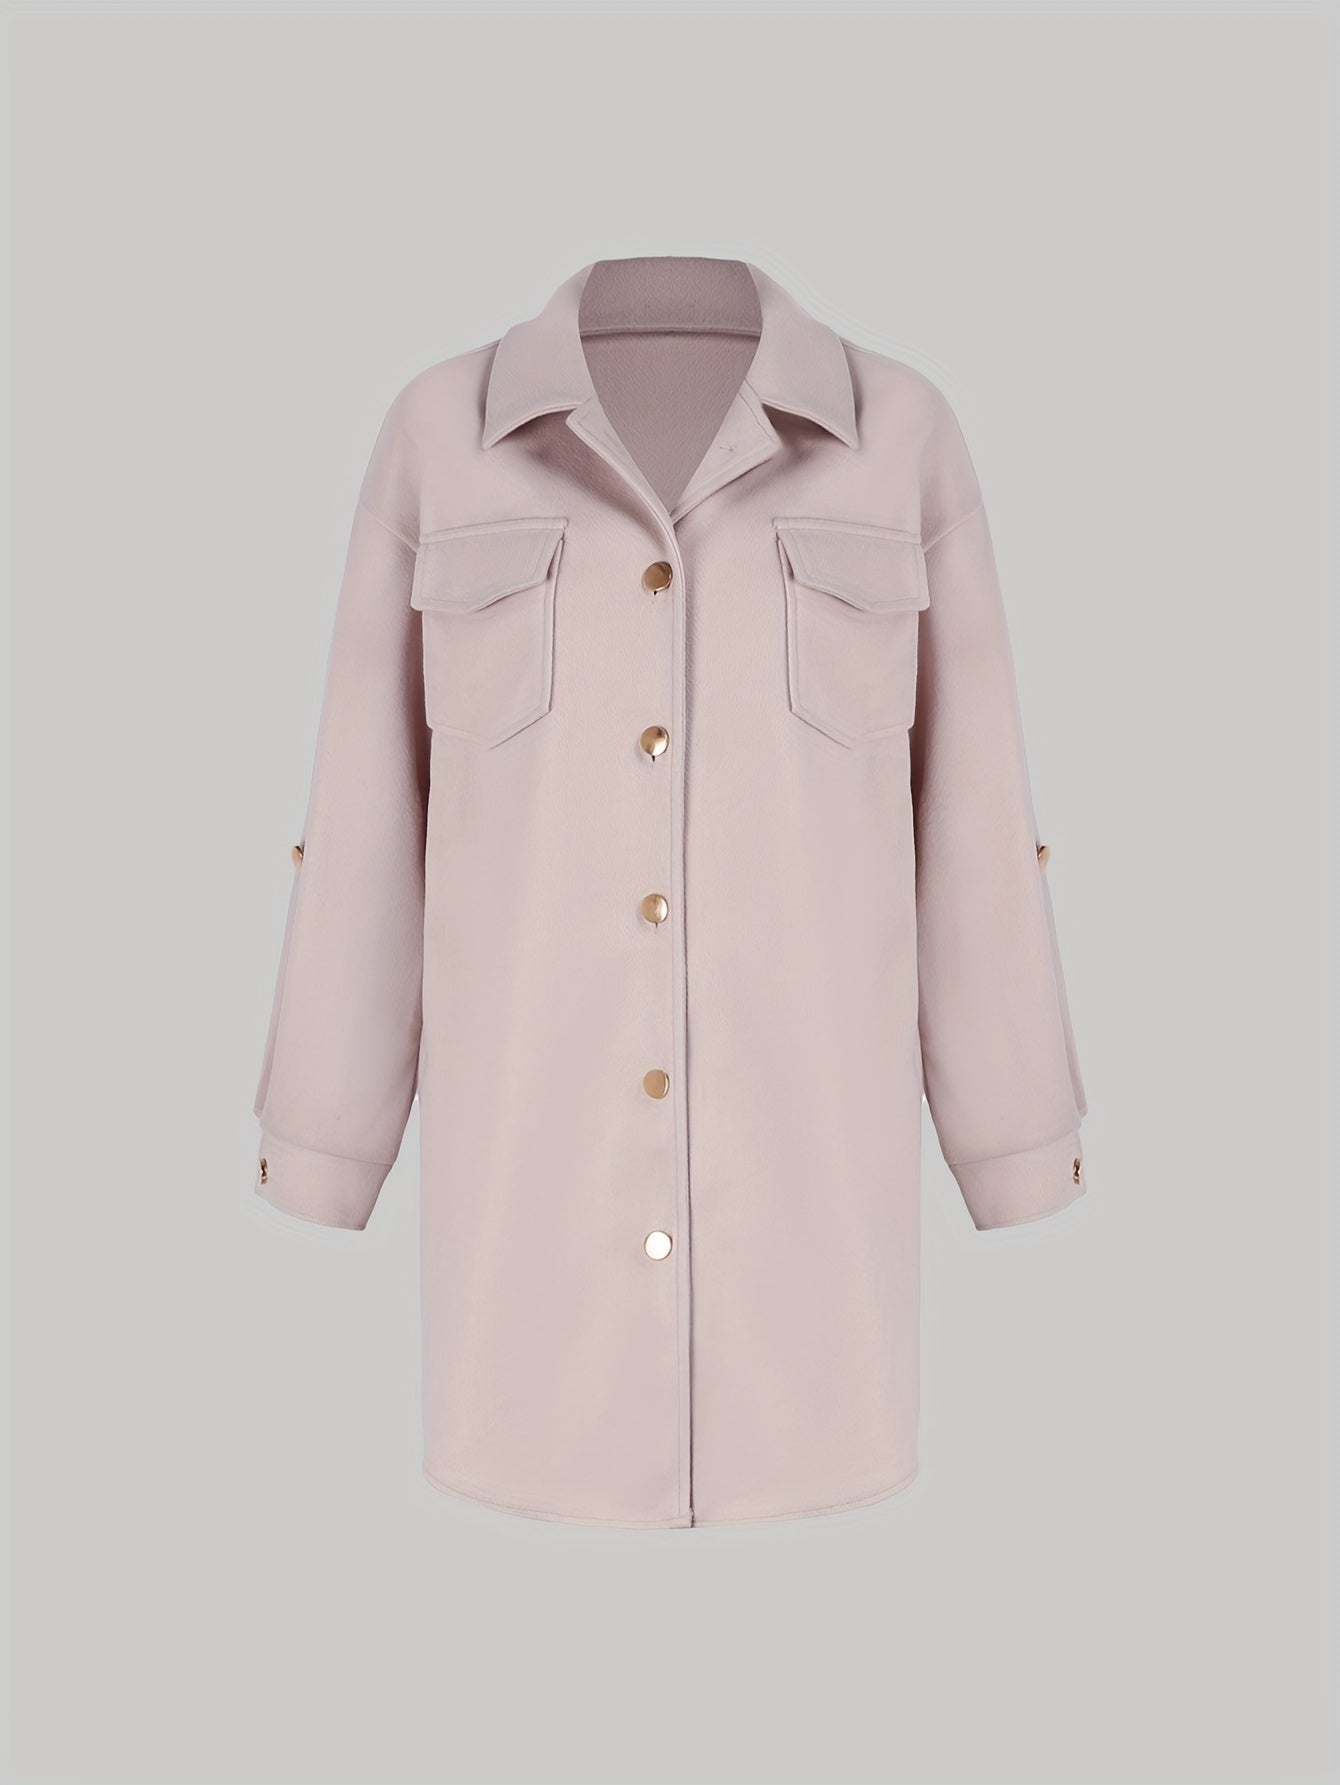 Antmvs Plus Size Casual Coat, Women's Plus Solid Roll Up Long Sleeve Button Up Lapel Collar Tunic Coat With Pockets